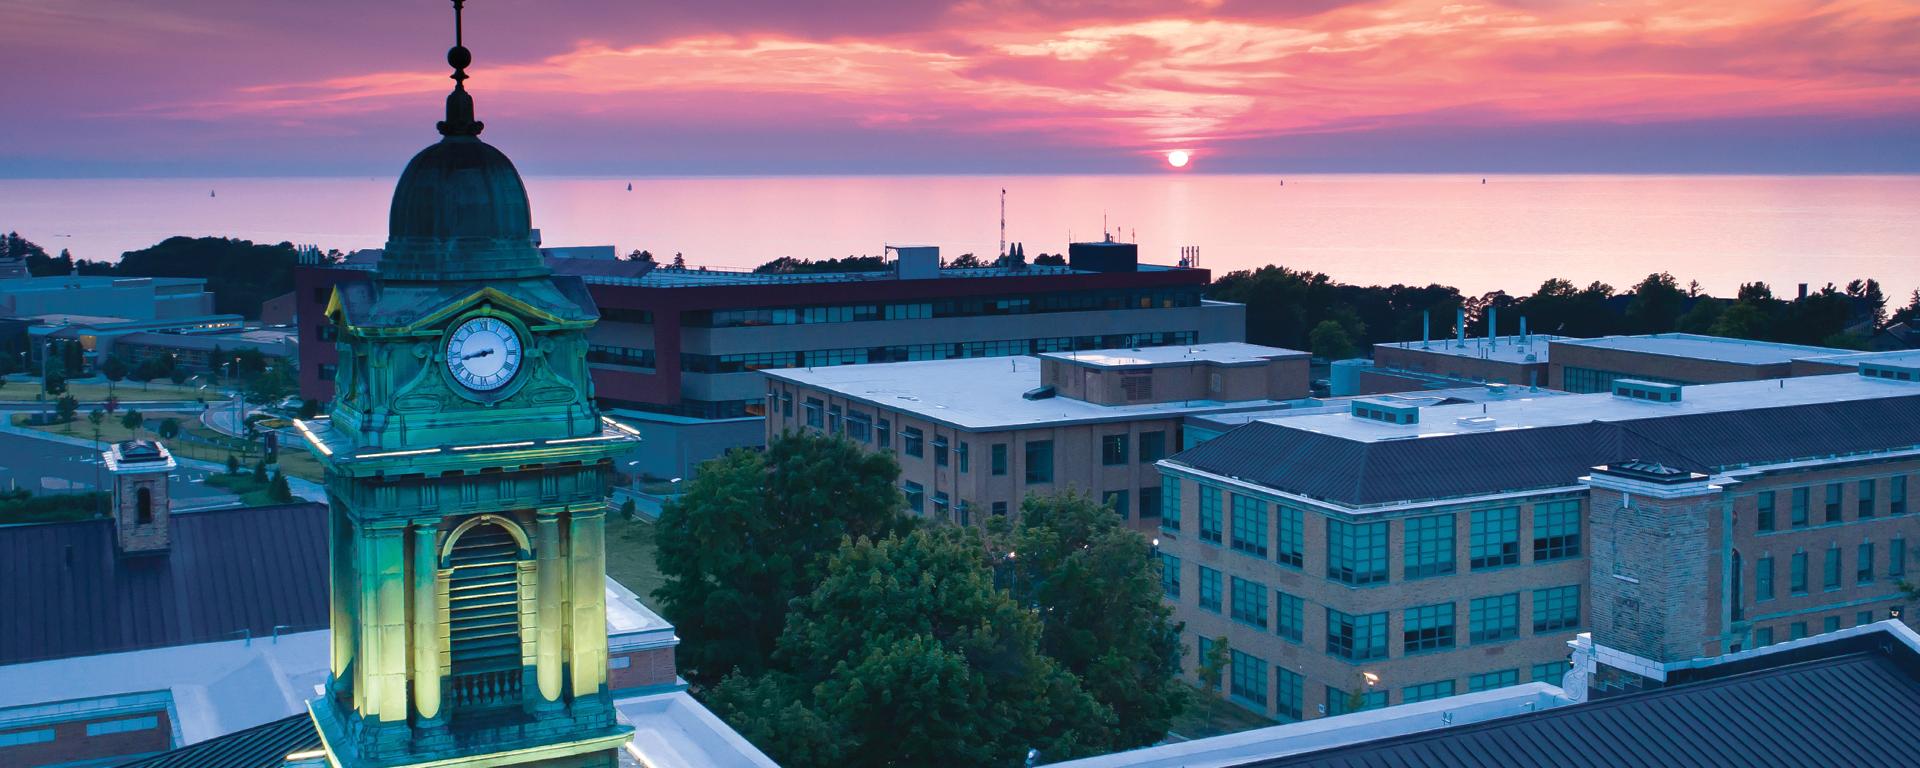 Aerial view of Sheldon Hall in front of a sunset